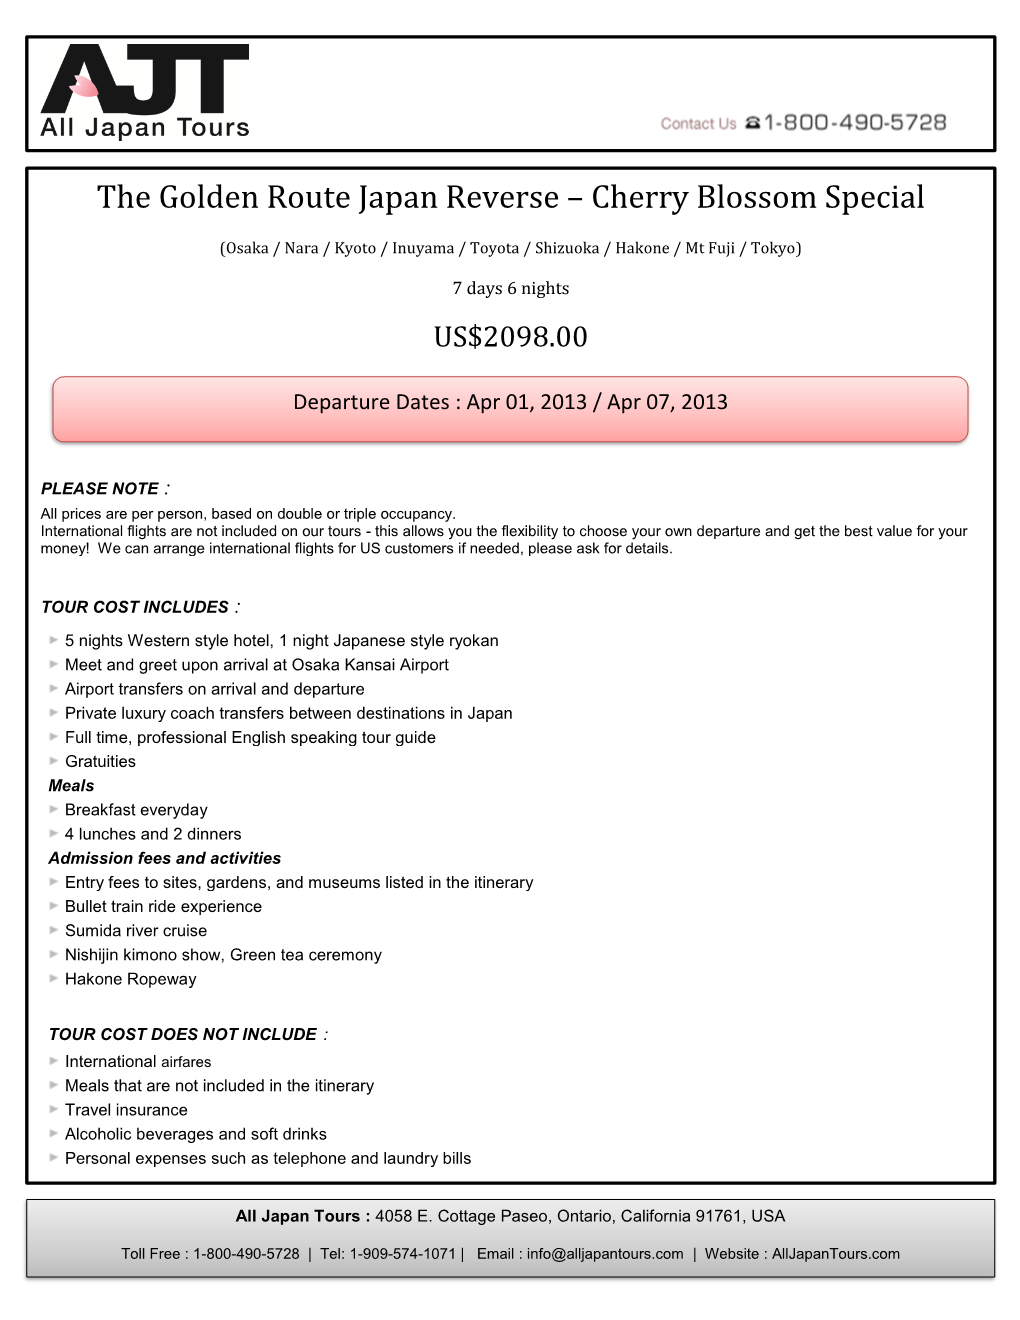 The Golden Route Japan Reverse – Cherry Blossom Special